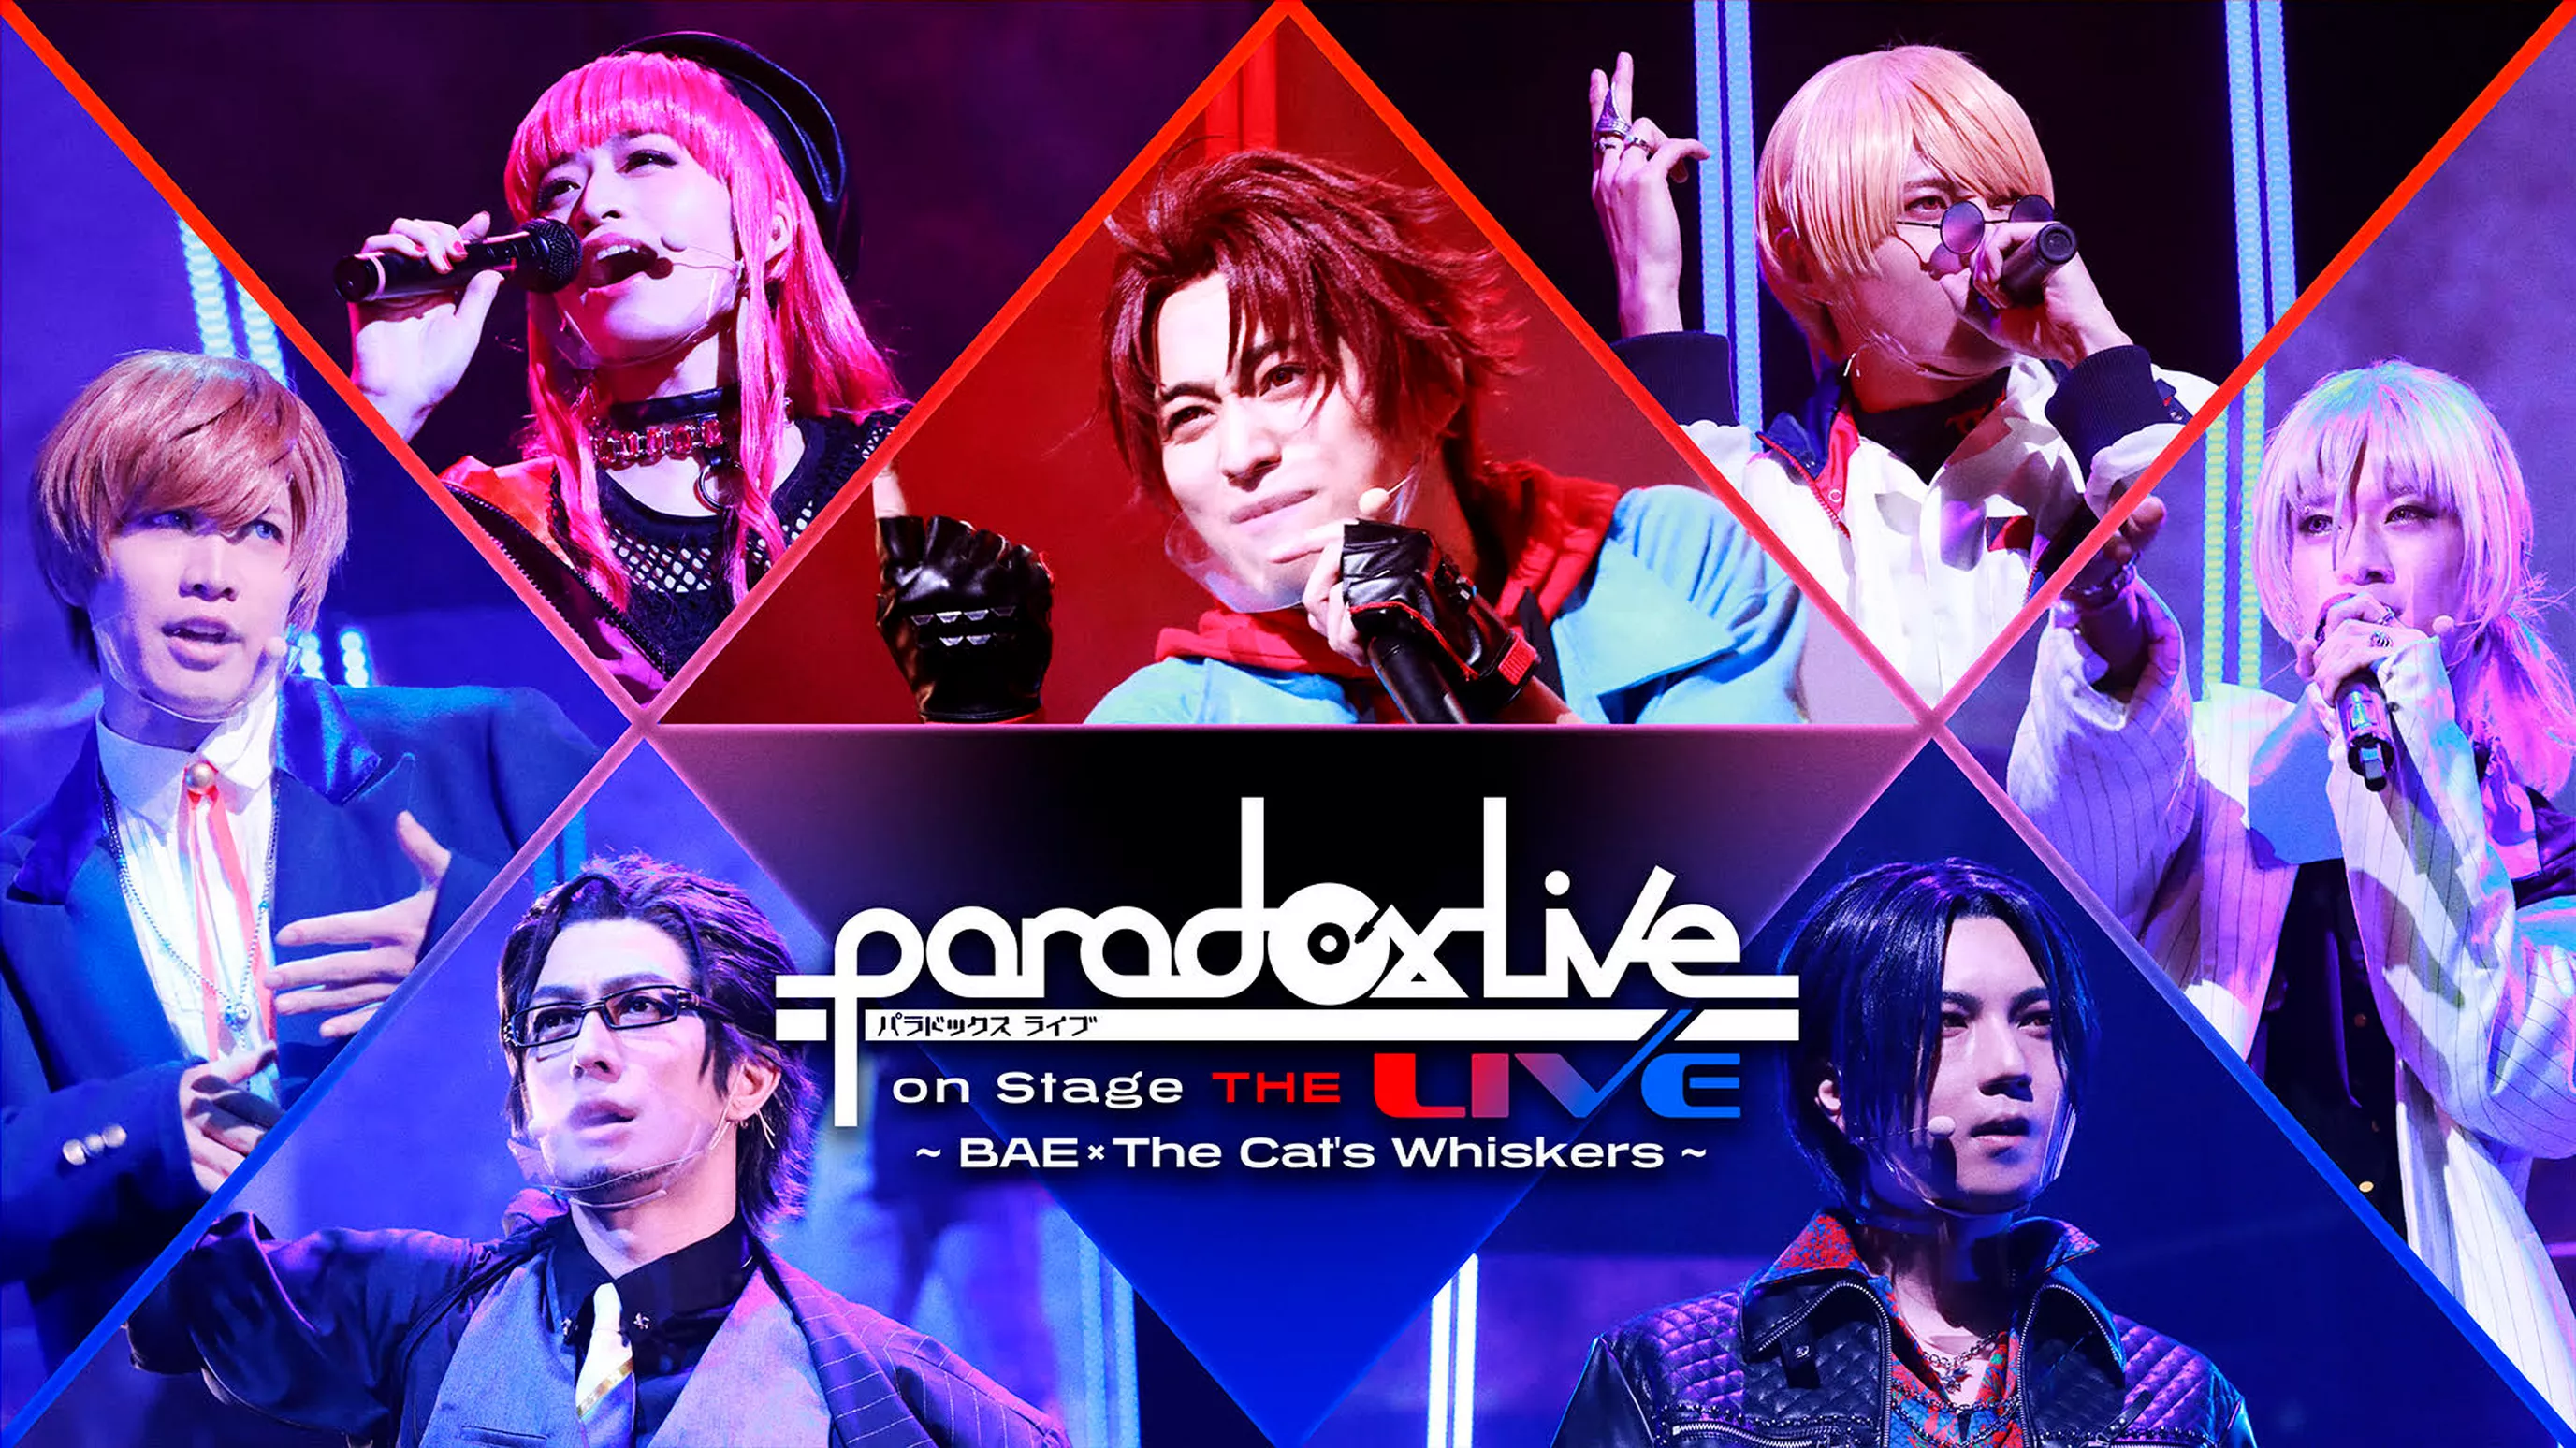 Paradox Live on Stage THE LIVE BAE × The Cat's Whiskers